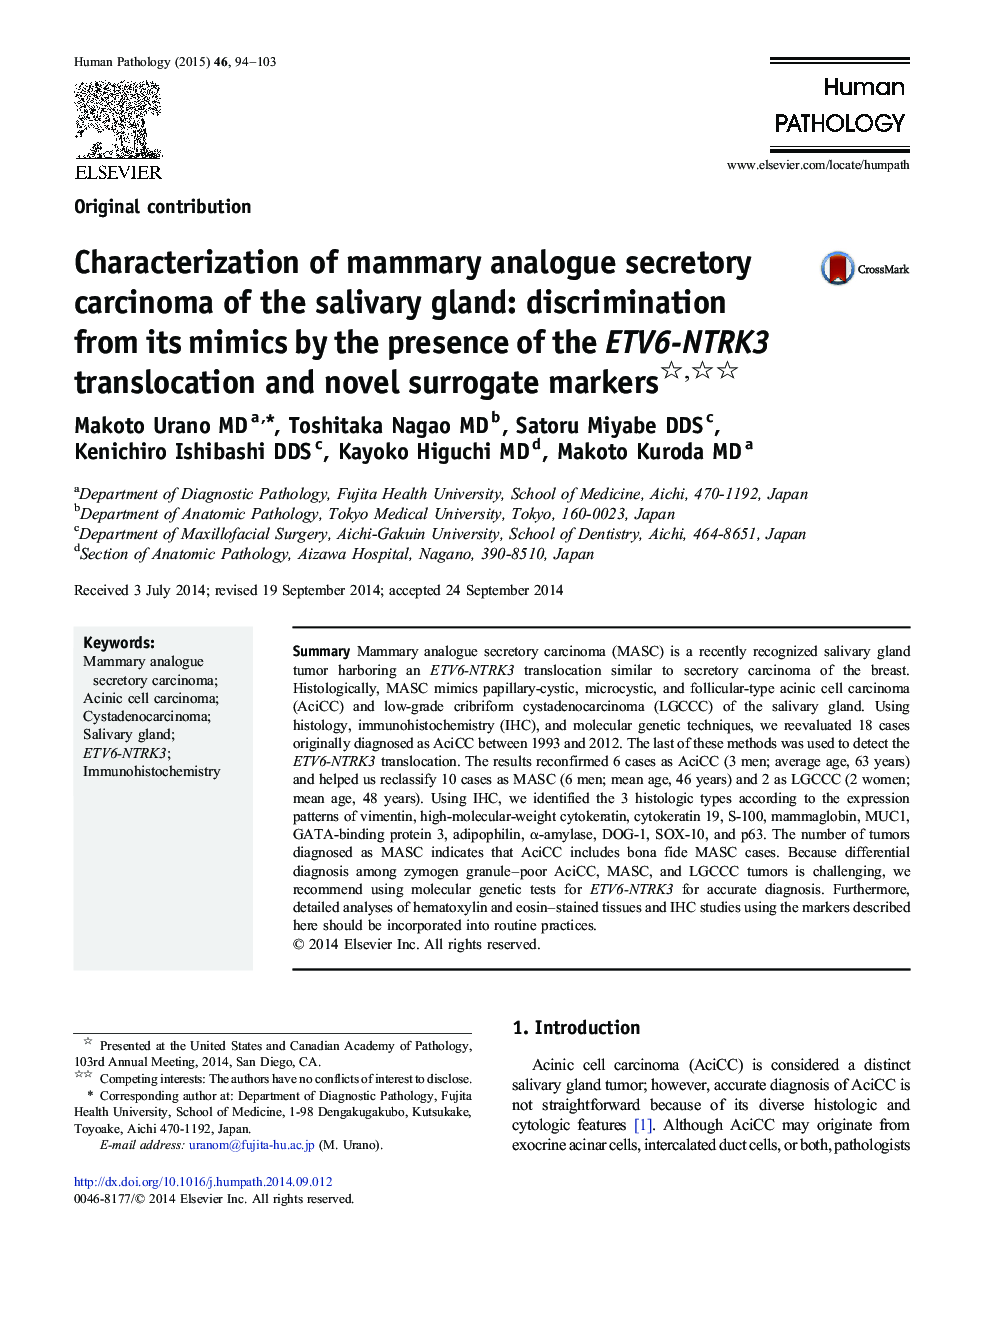 Characterization of mammary analogue secretory carcinoma of the salivary gland: discrimination from its mimics by the presence of the ETV6-NTRK3 translocation and novel surrogate markers